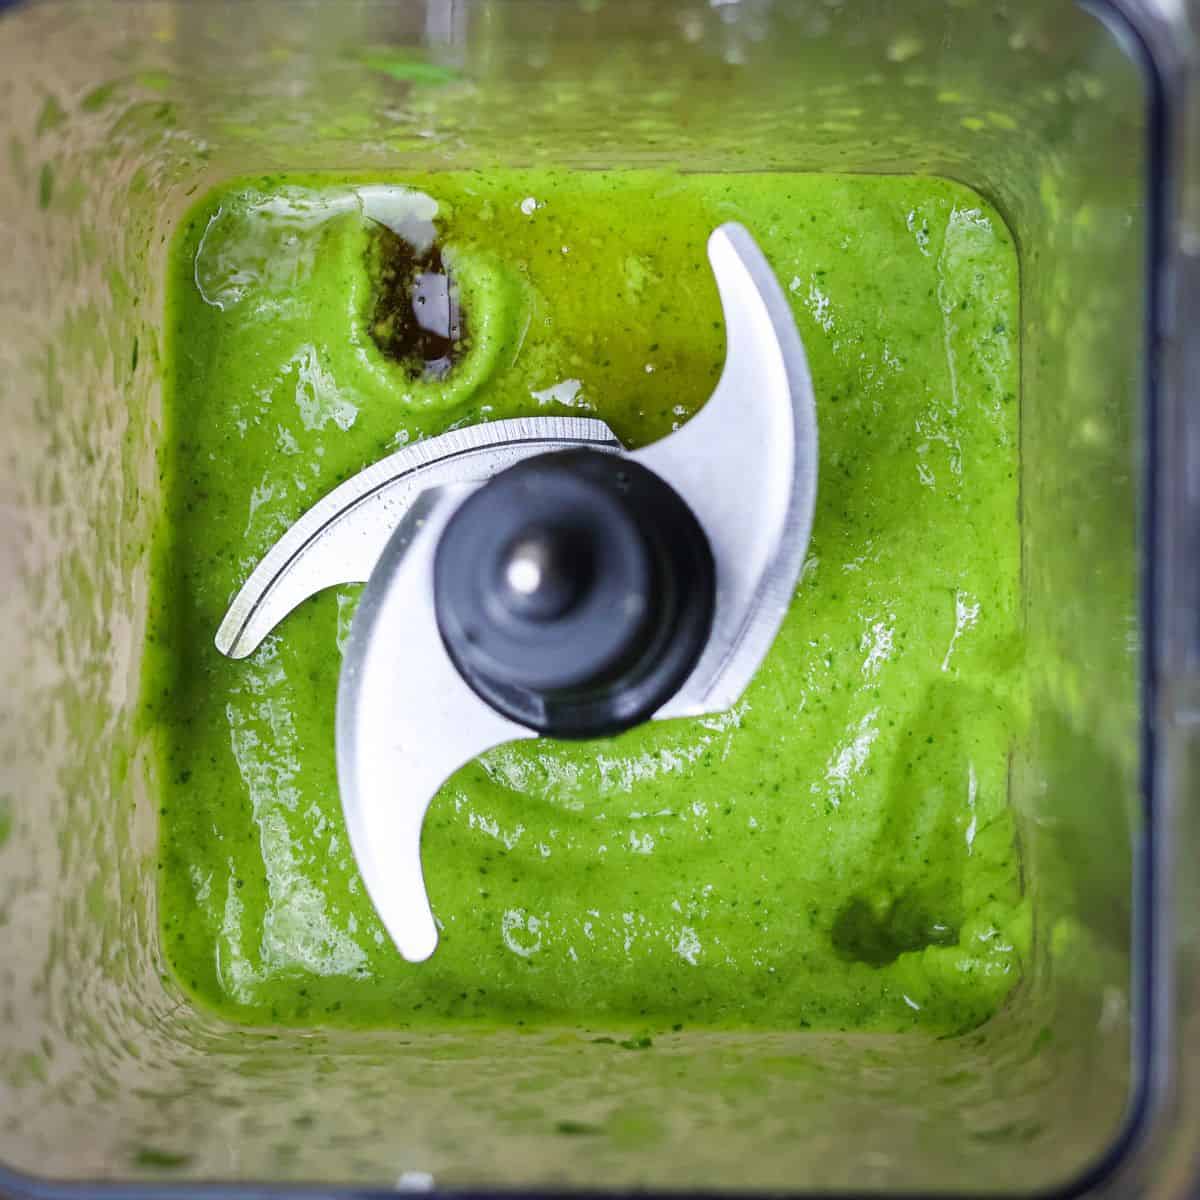 Top view of a blender showing a vibrant green smoothie mix with maple syrup added after a taste test.